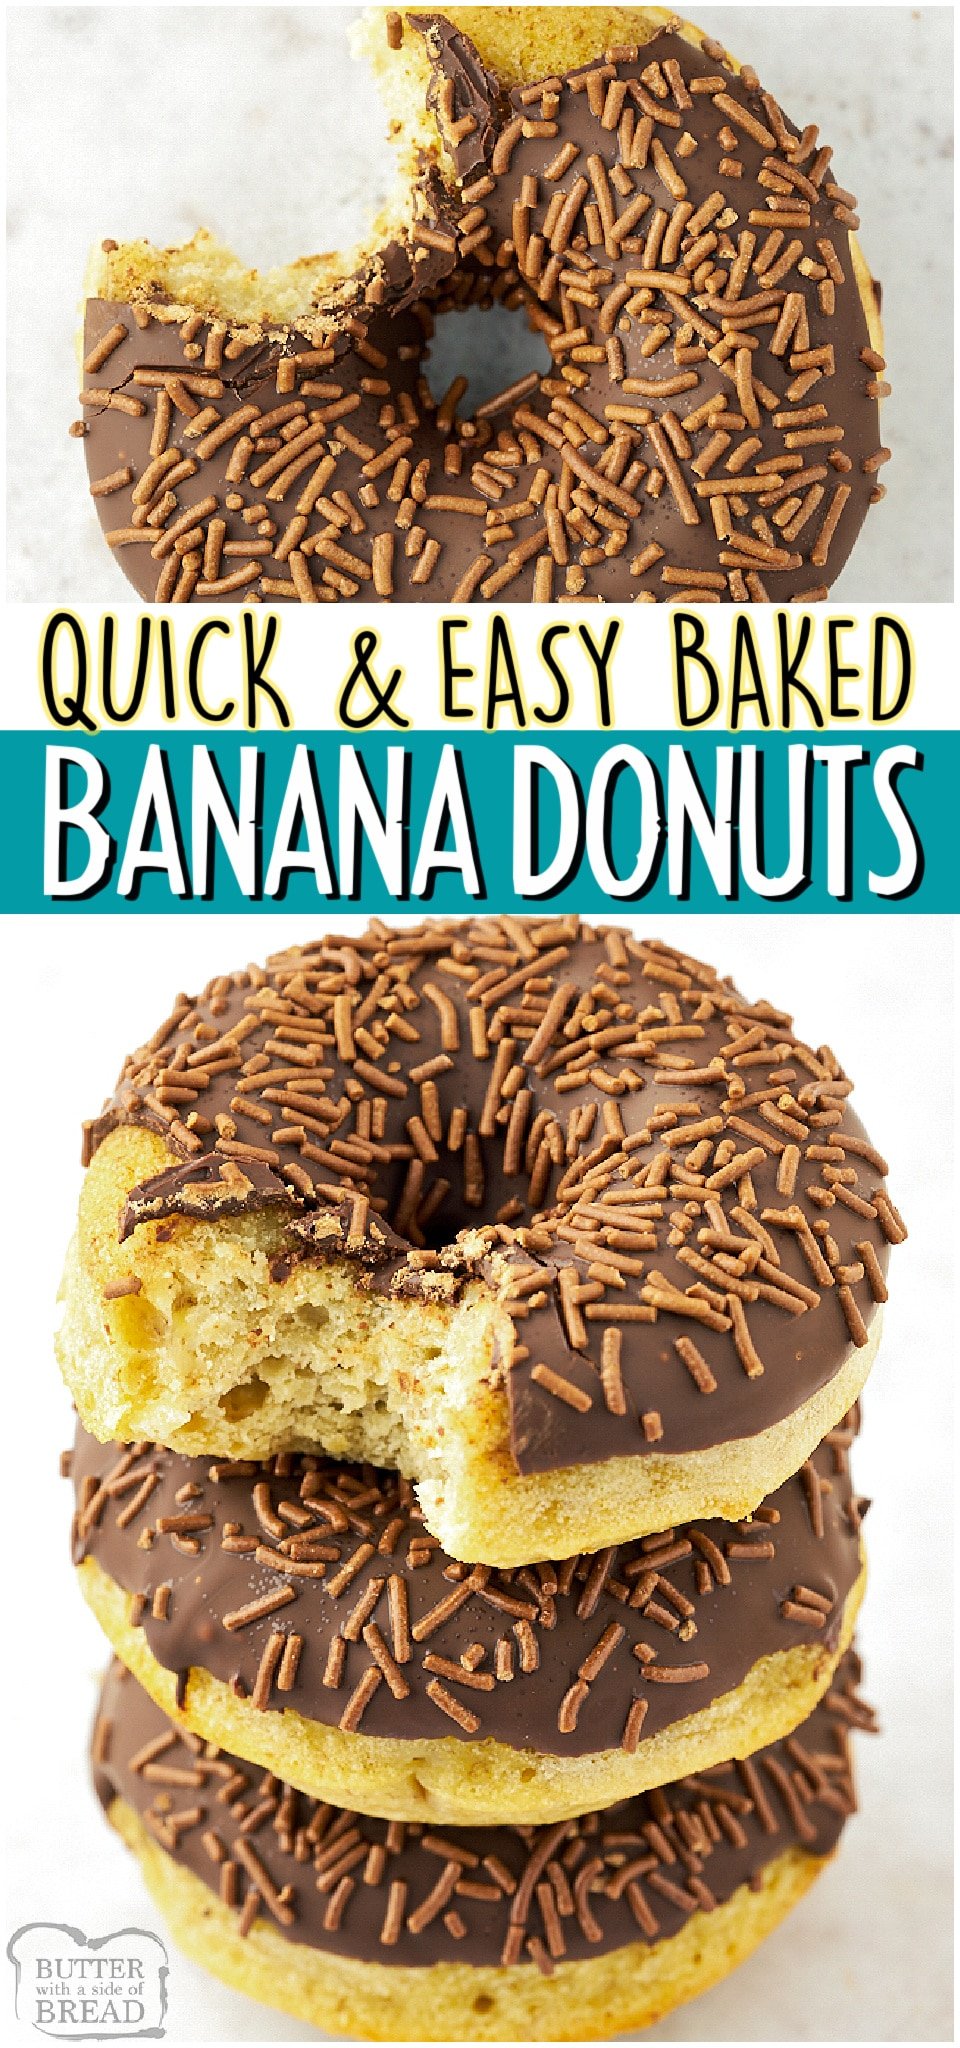 Baked Banana Donuts made with flour, cornstarch, sugar, butter, eggs & ripe bananas! Easy donut recipe covered in chocolate glaze & chocolate sprinkles that everyone loves! #bananas #donuts #breakfast #baked #baking #chocolate #easyrecipe from BUTTER WITH A SIDE OF BREAD